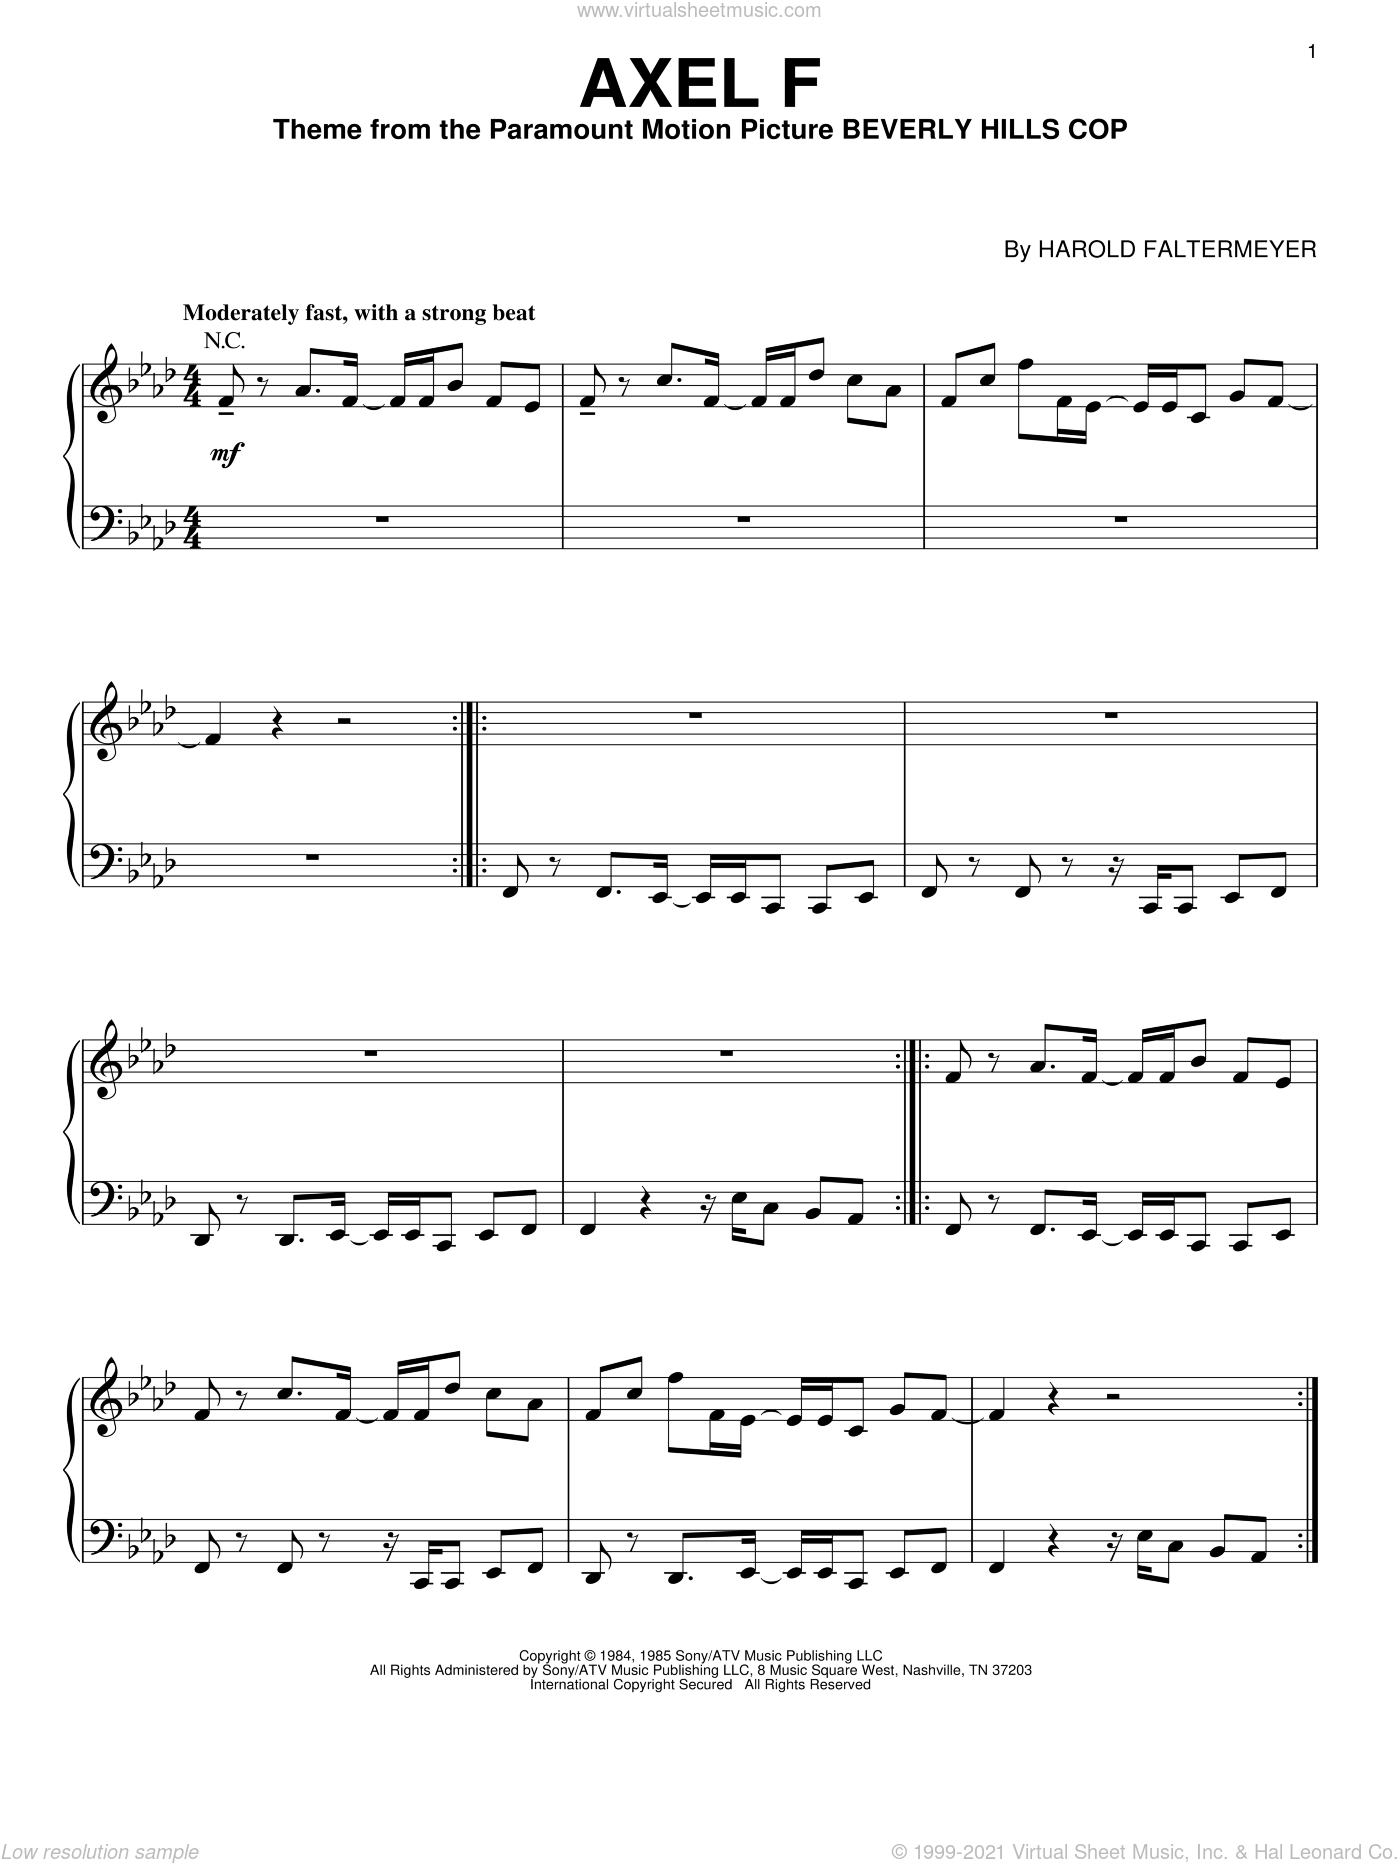 Faltermeyer - Axel F for piano solo interactive sheet music